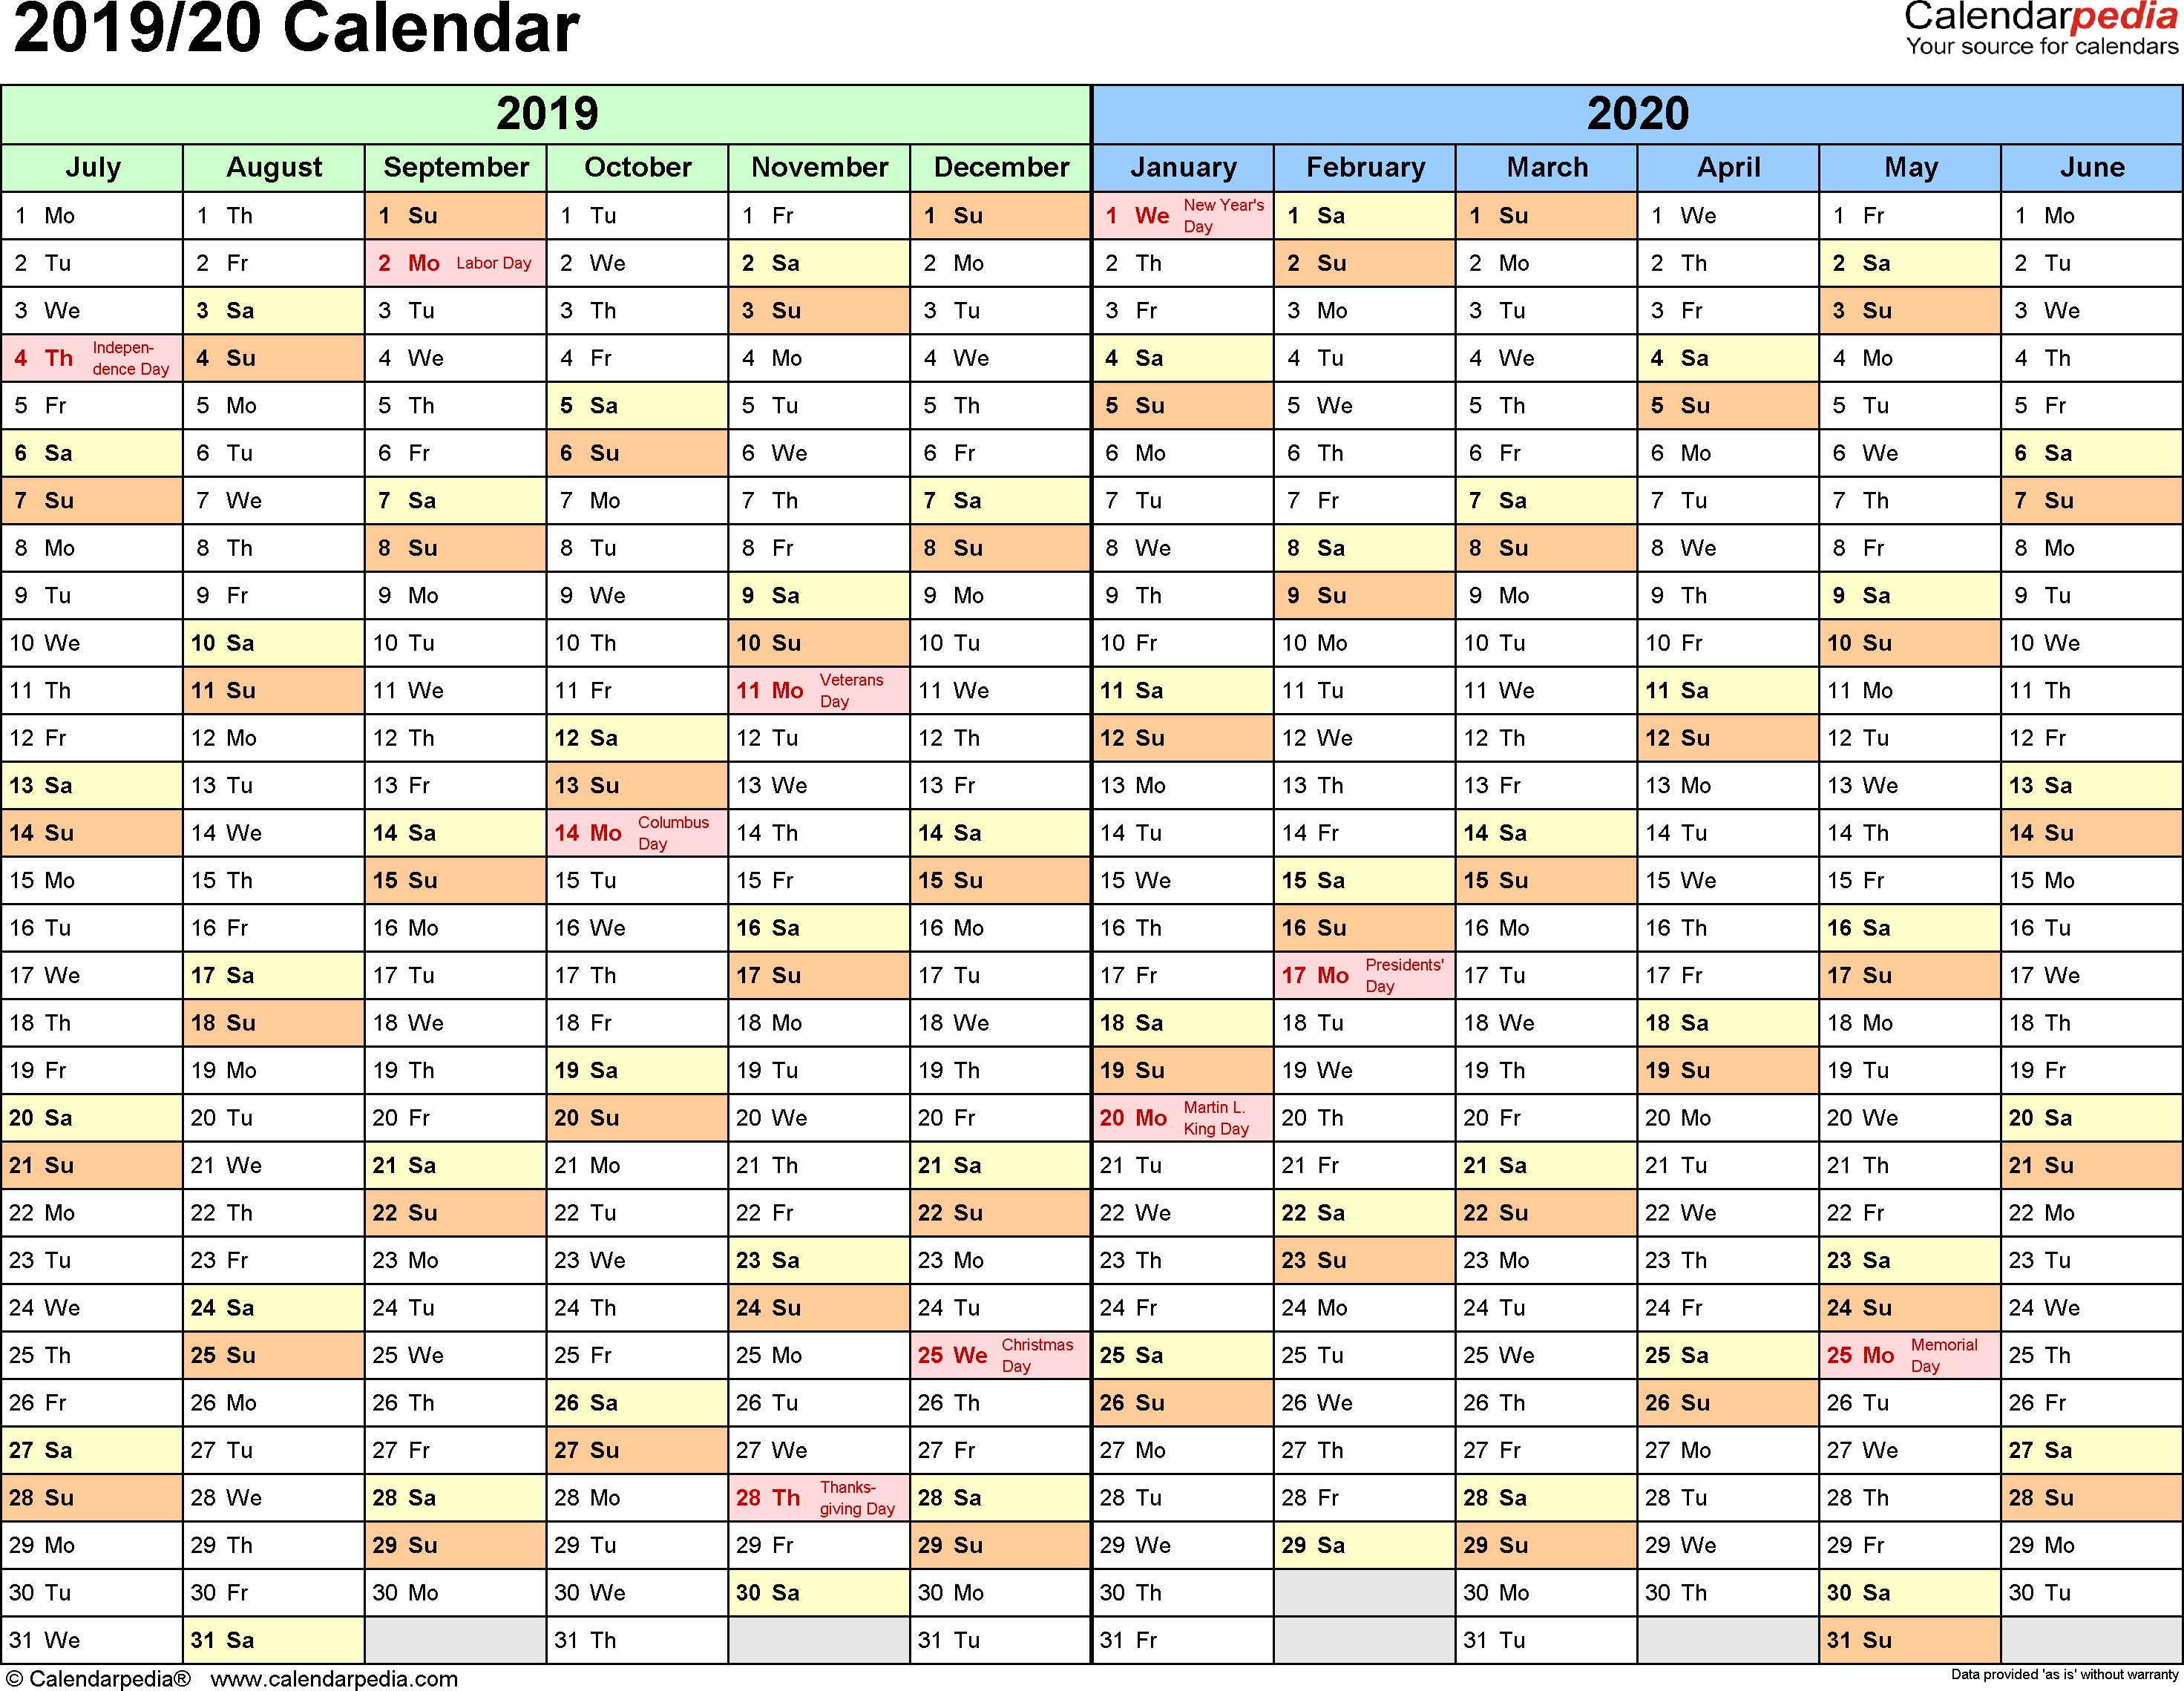 Split Year Calendar 2019/20 (July To June) - Excel Templates intended for School Year At A Glance Calendar 2019-2020